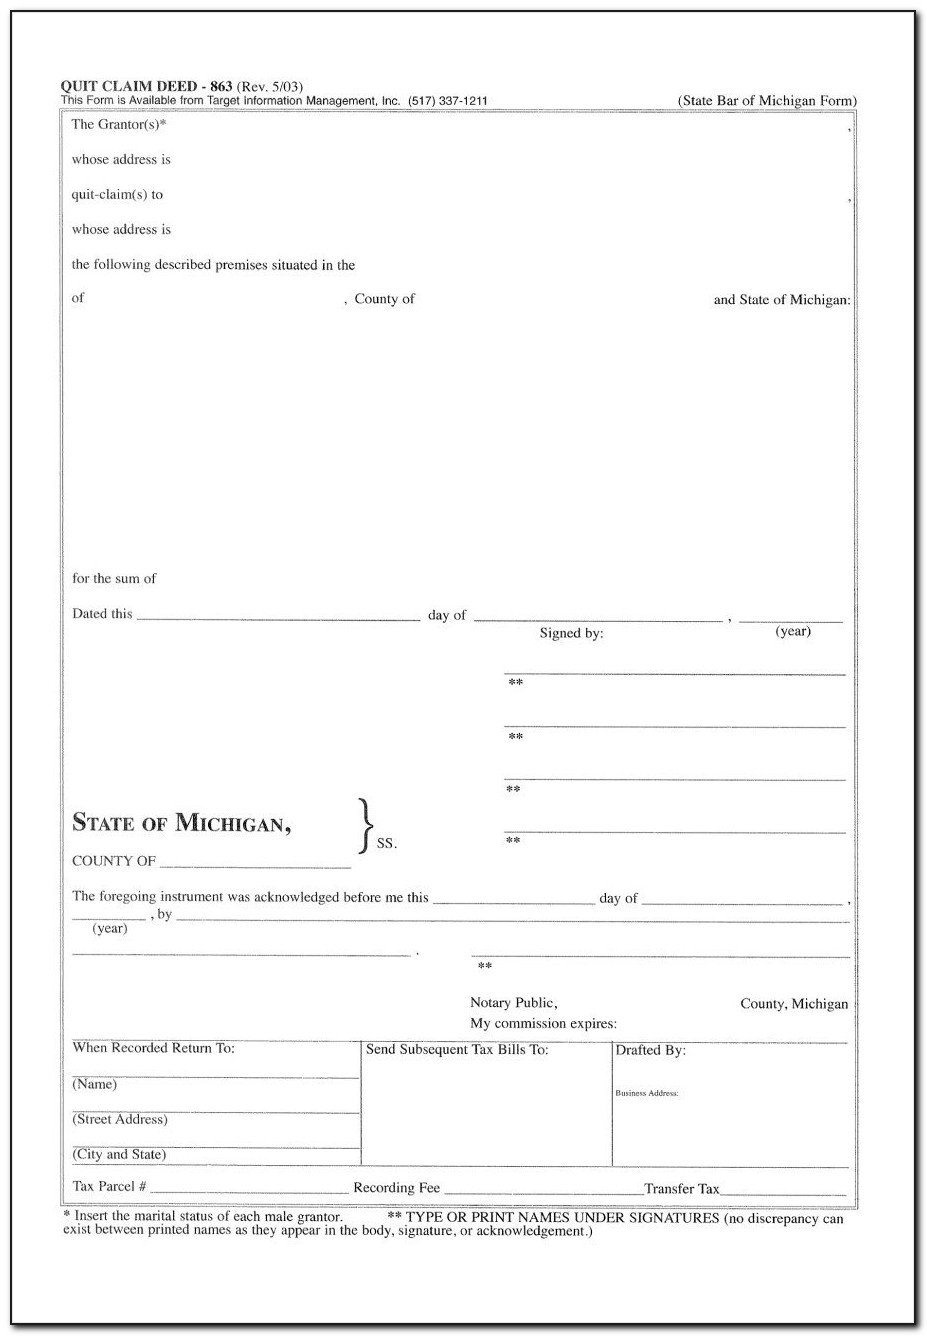 How To Fill Out A Quit Claim Deed Form In Ohio